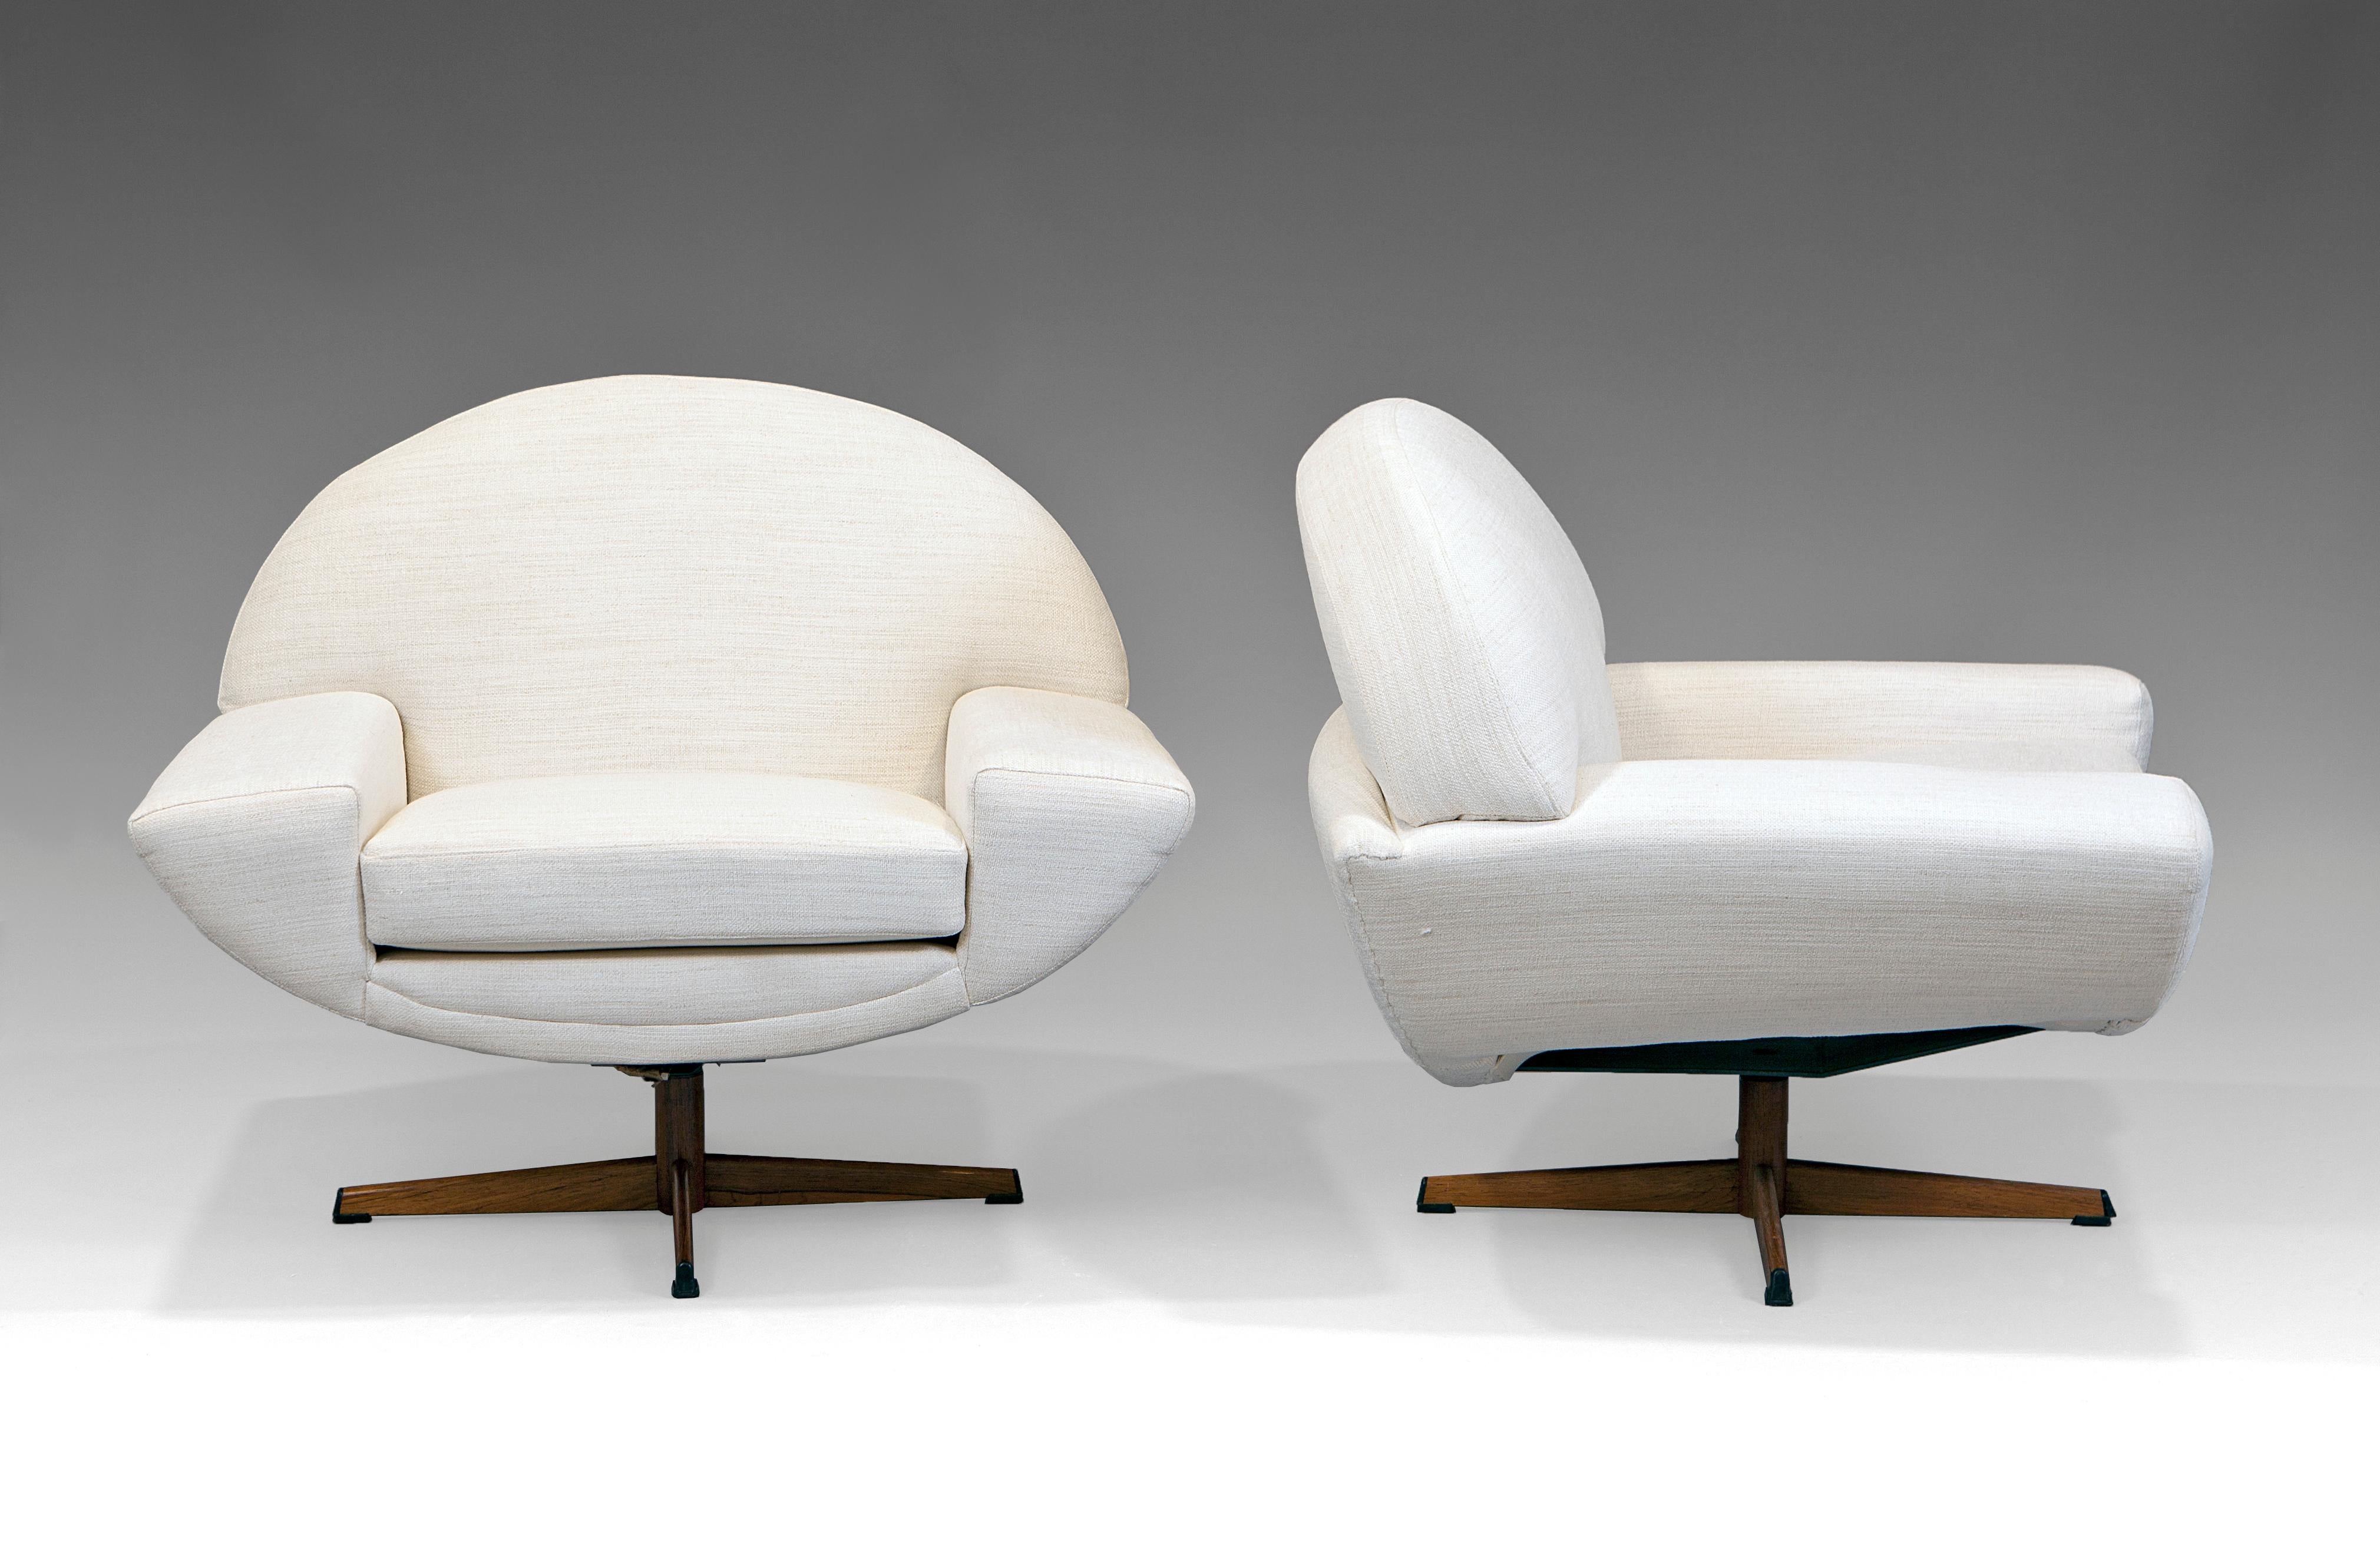 “Capri” swivel armchairs by Johannes Andersen for Trensum. Upholstery and wood-like coated metal. Sweden, 1960s. Perfect condition, completely renovated and reupholstered.